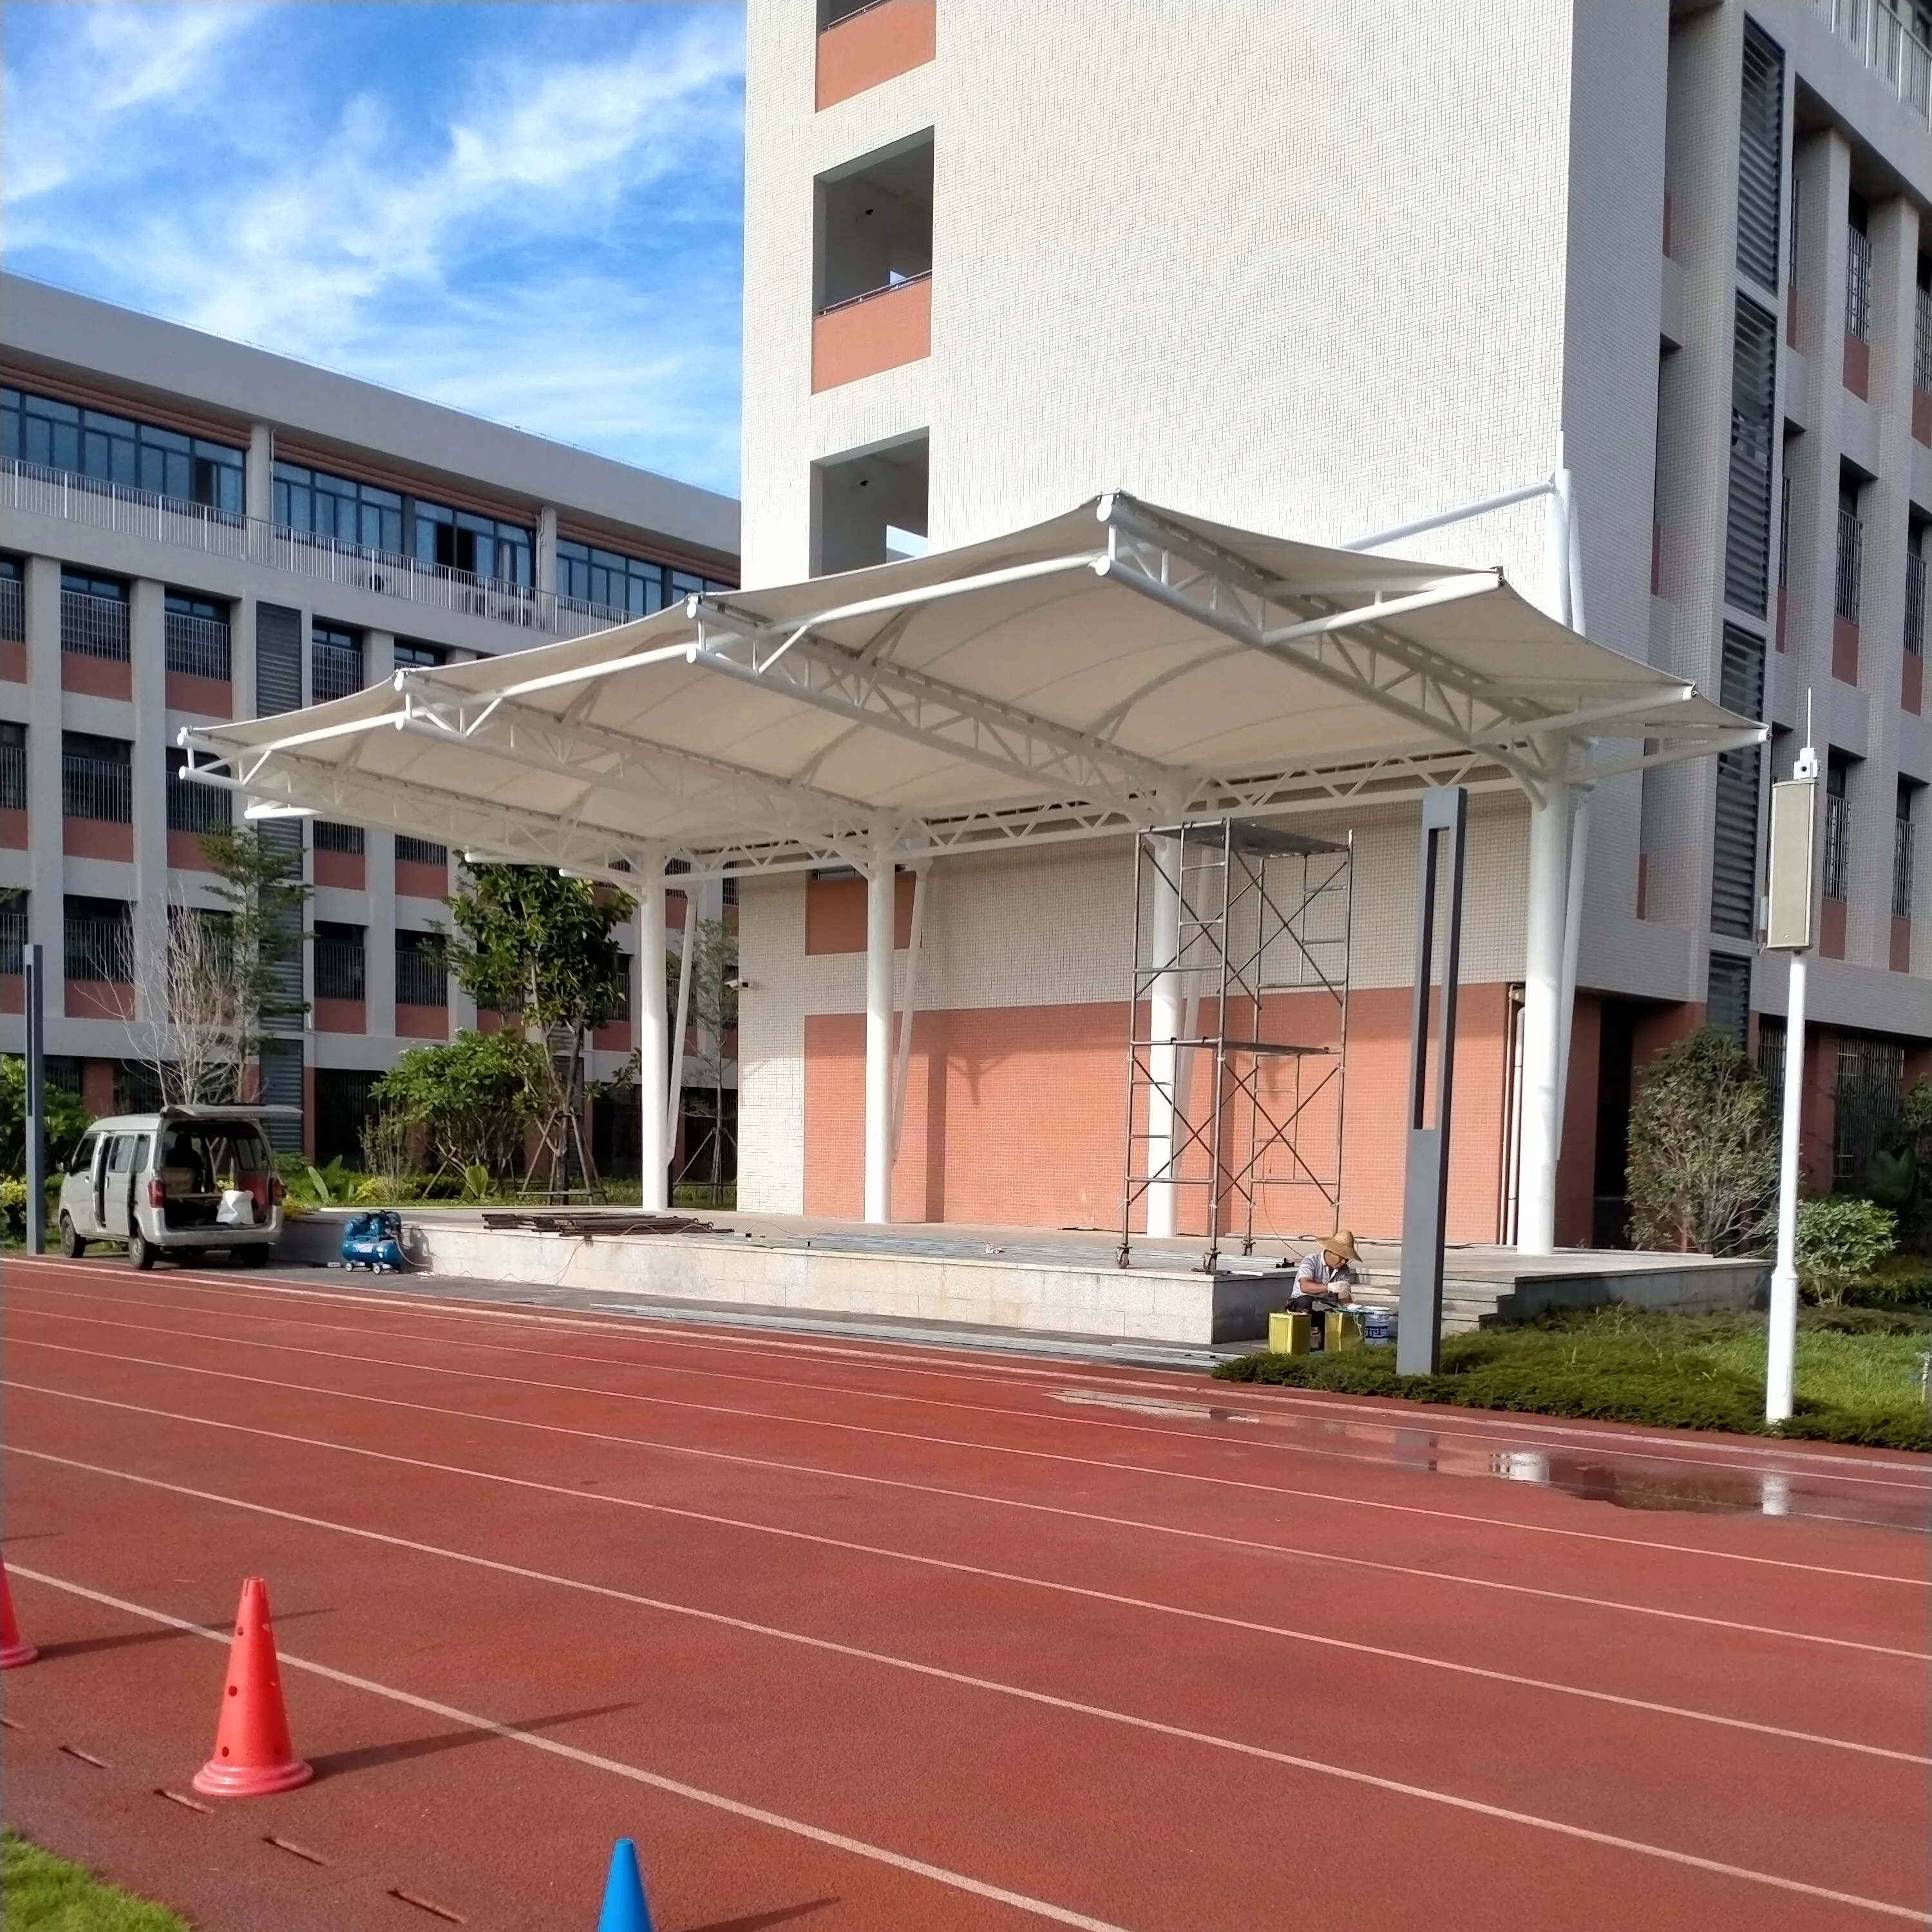 PVDF tensile architecture membrane structure shade fabric covering the roof